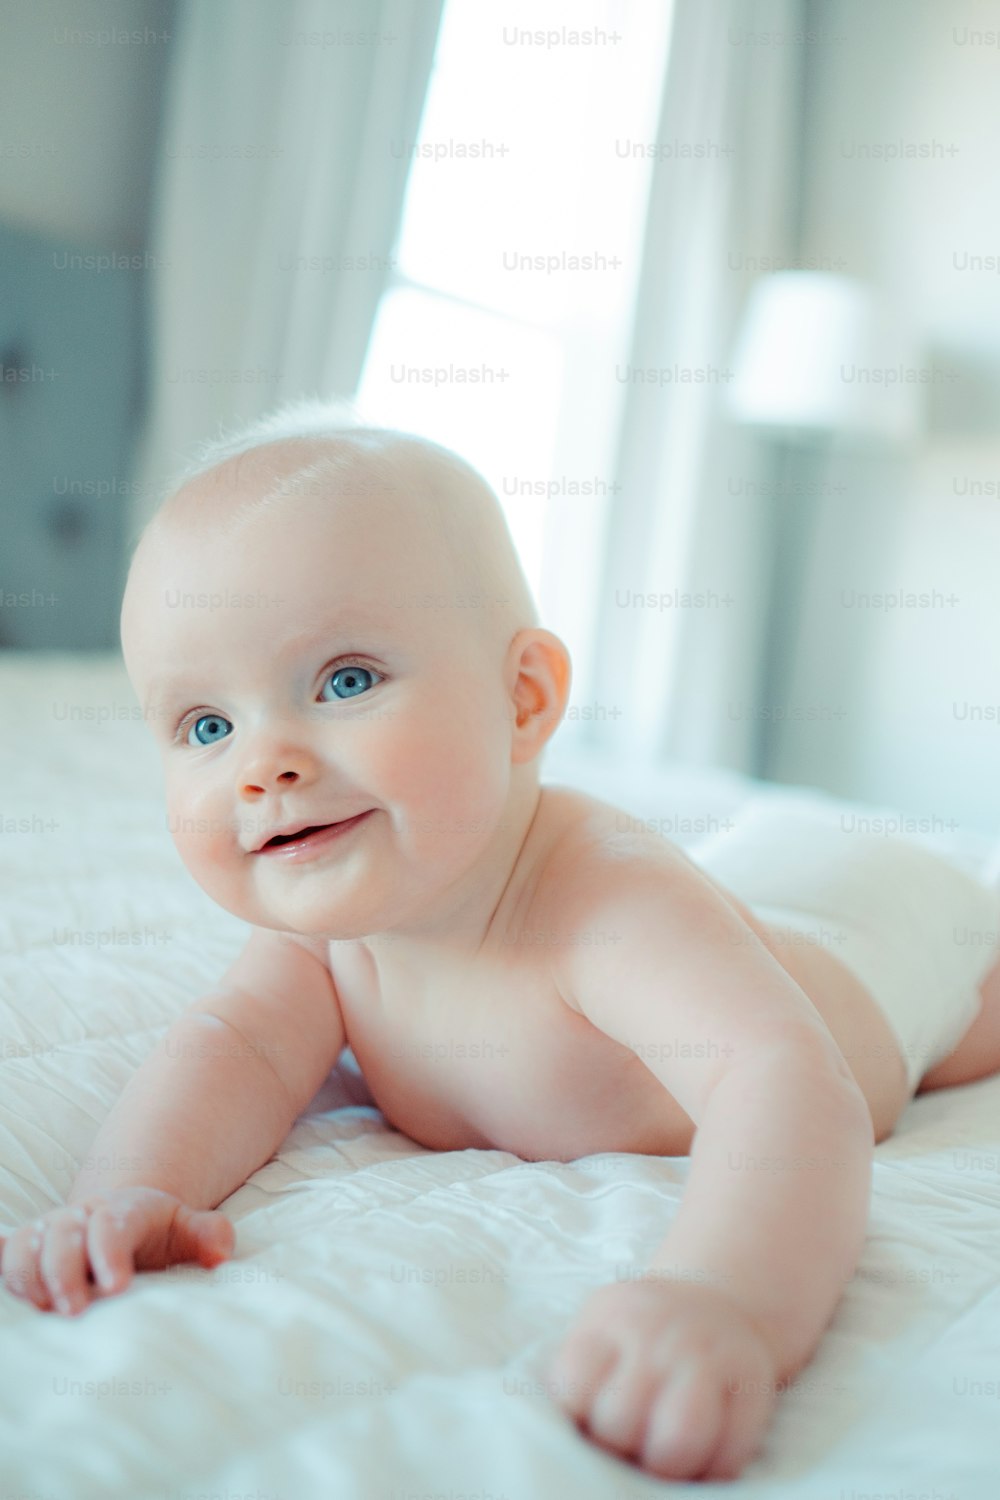 30,000+ Smiling Baby Pictures  Download Free Images on Unsplash